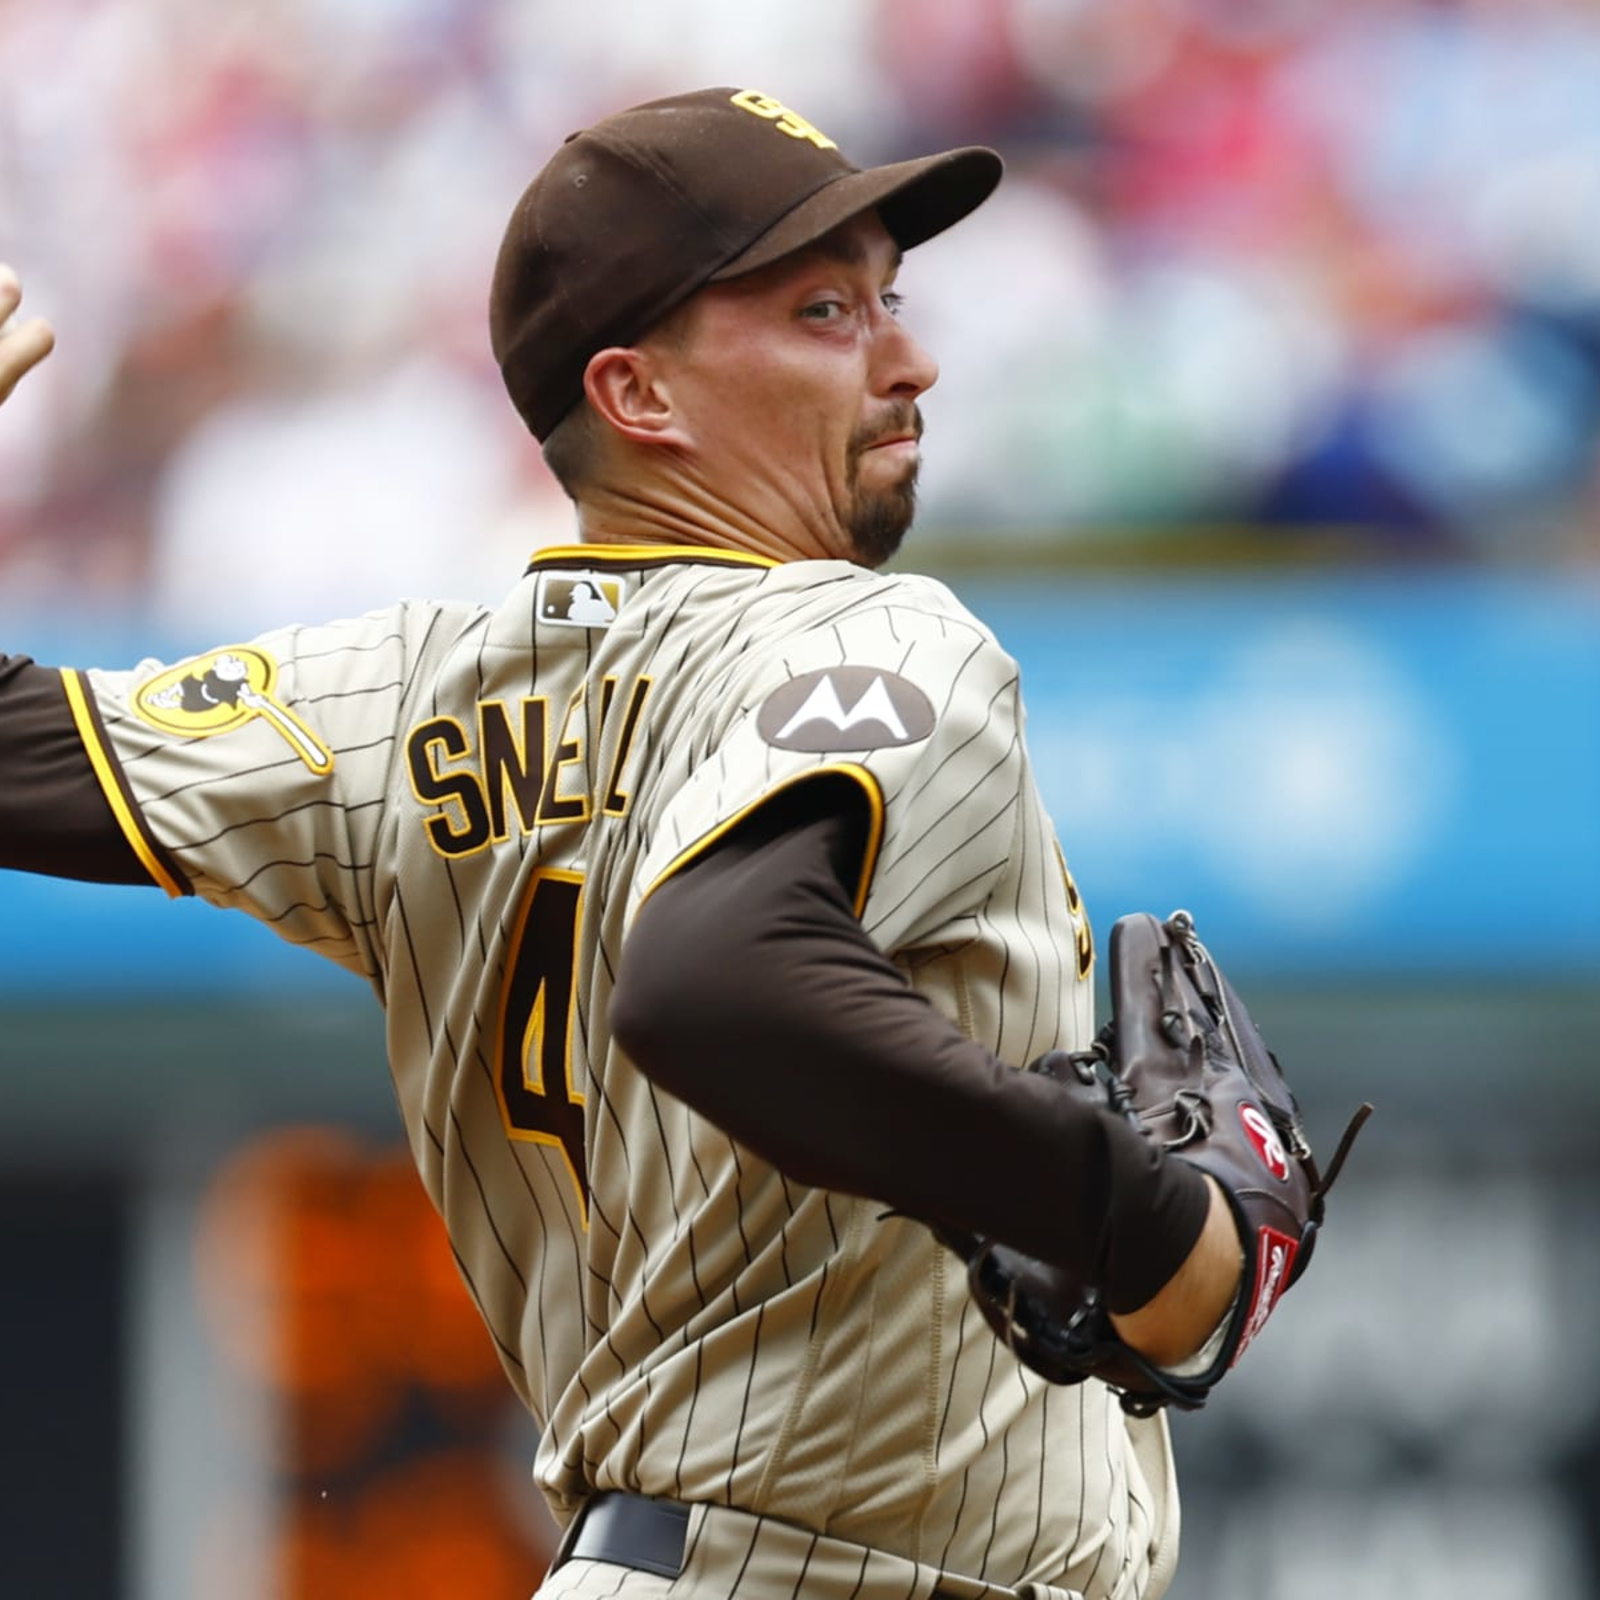 Where will Blake Snell end up at? : r/Padres